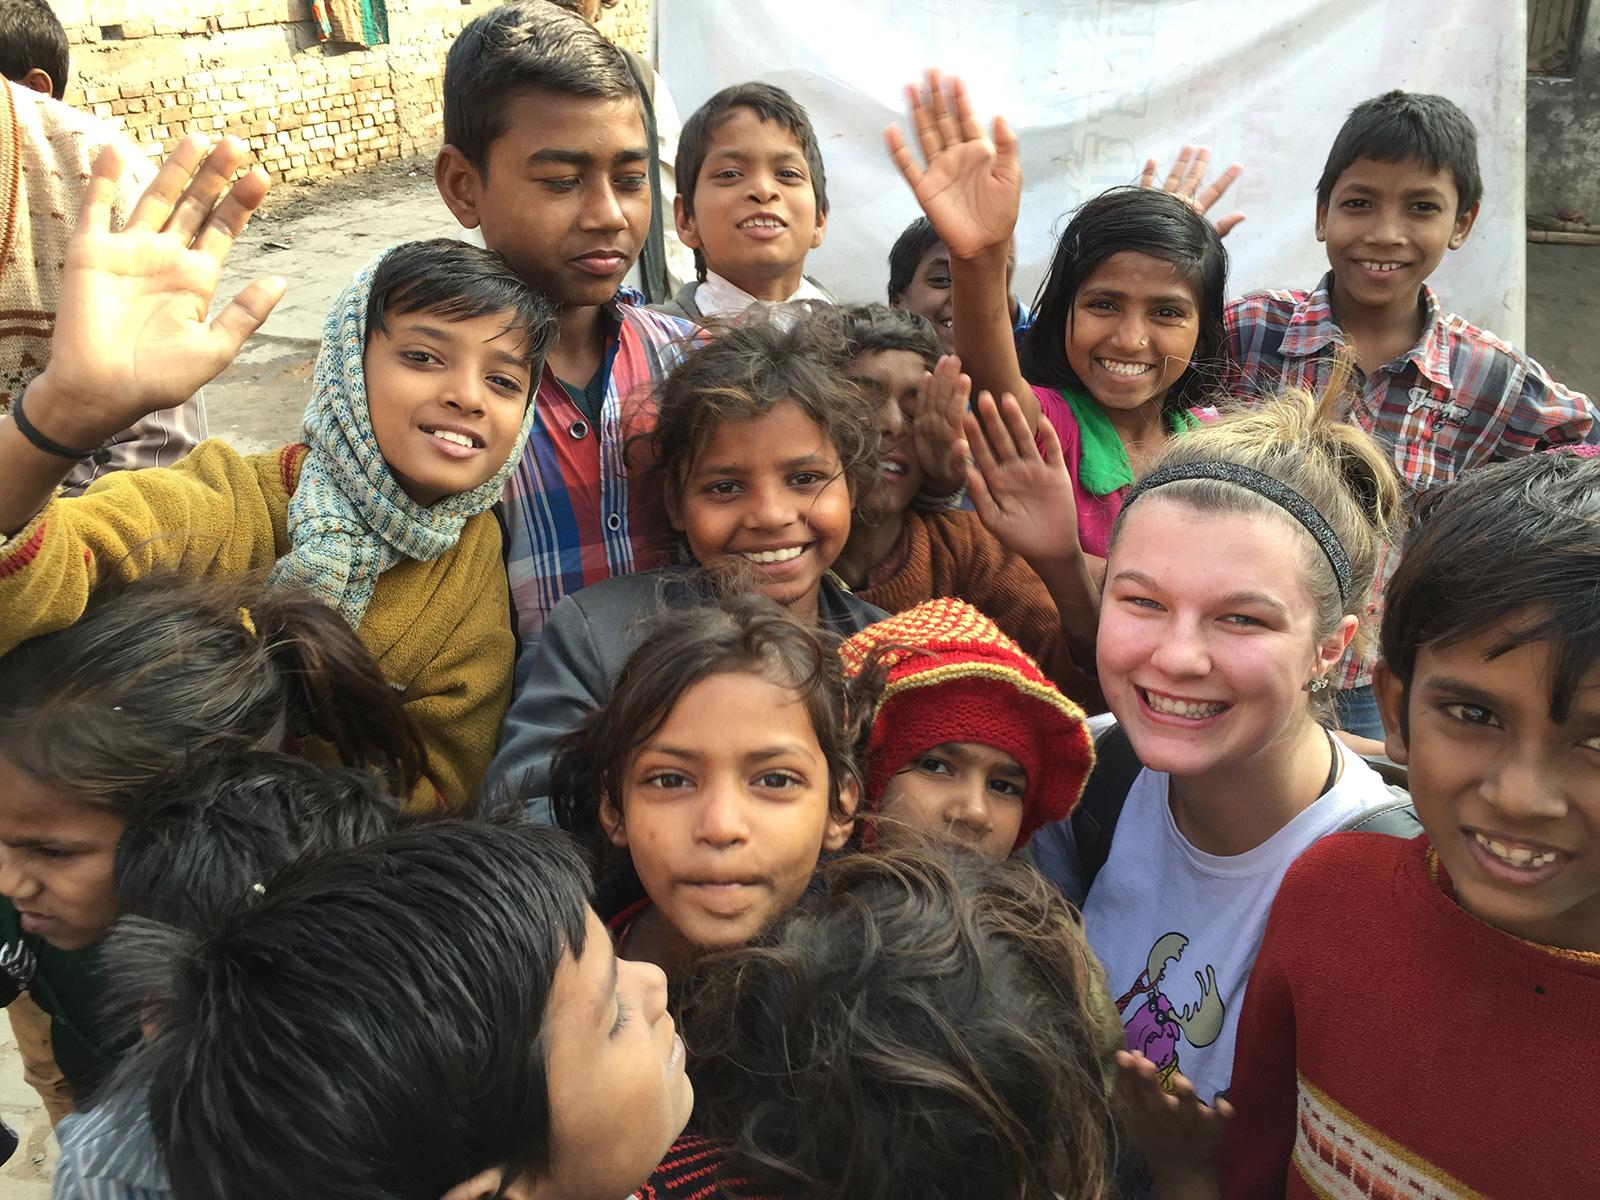 Carroll College student abroad surrounded by children